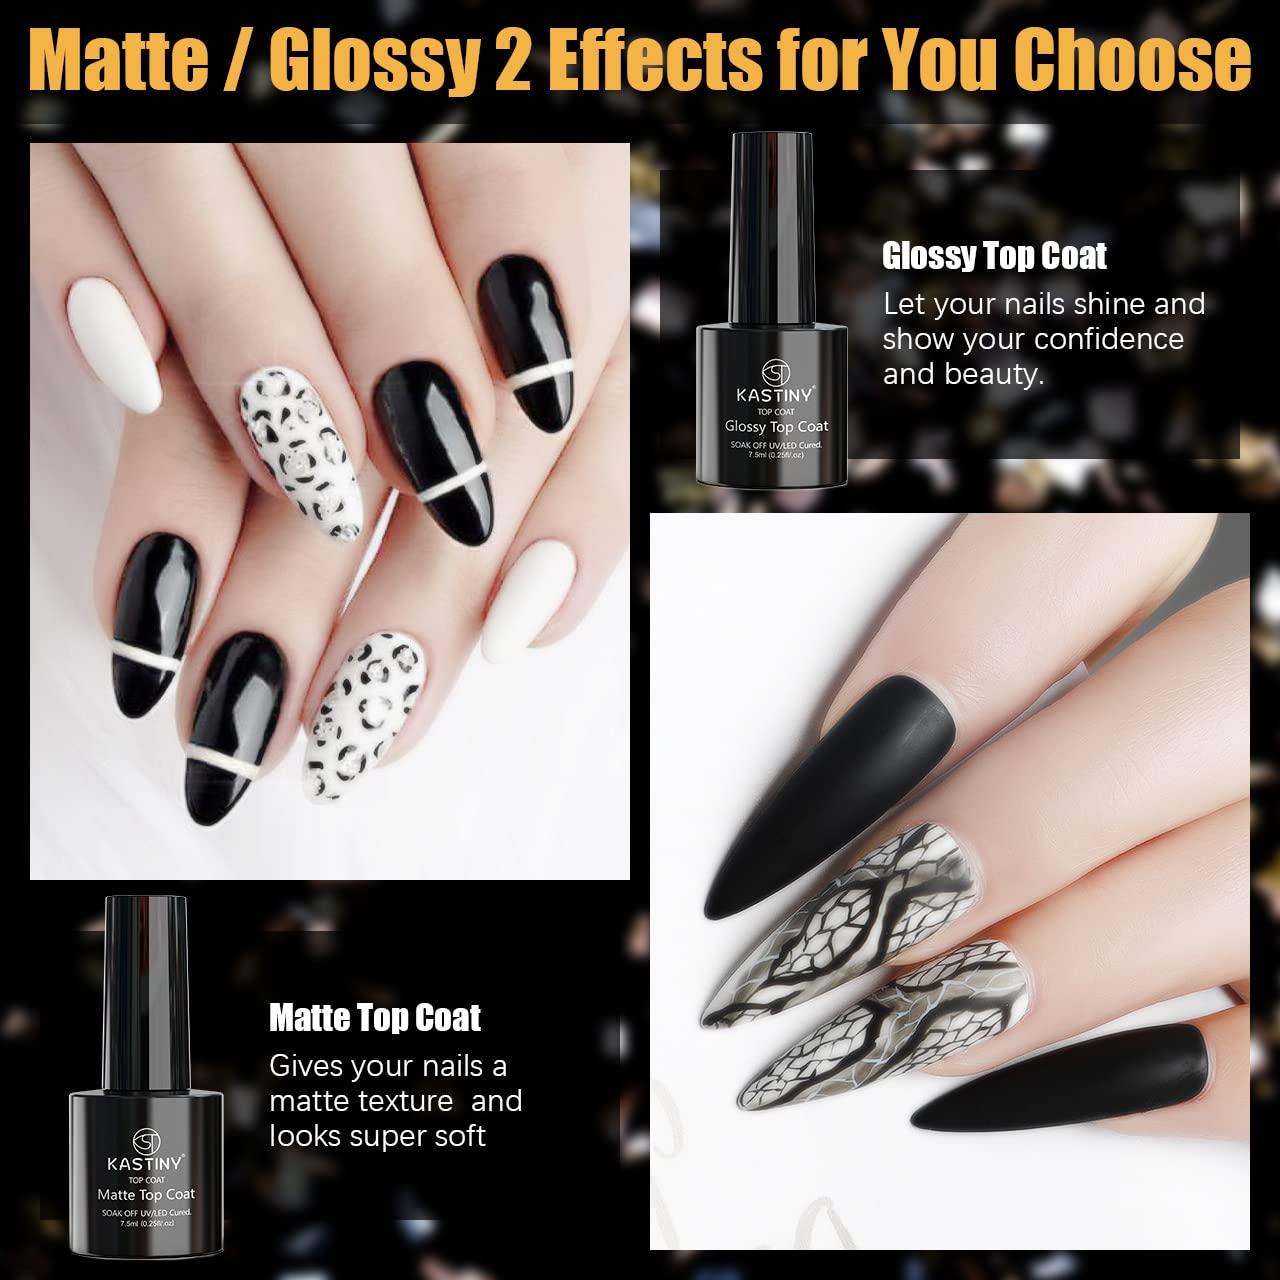 Combine Matte And Glossy In The Same Manicure For Dynamic, Textured Nails